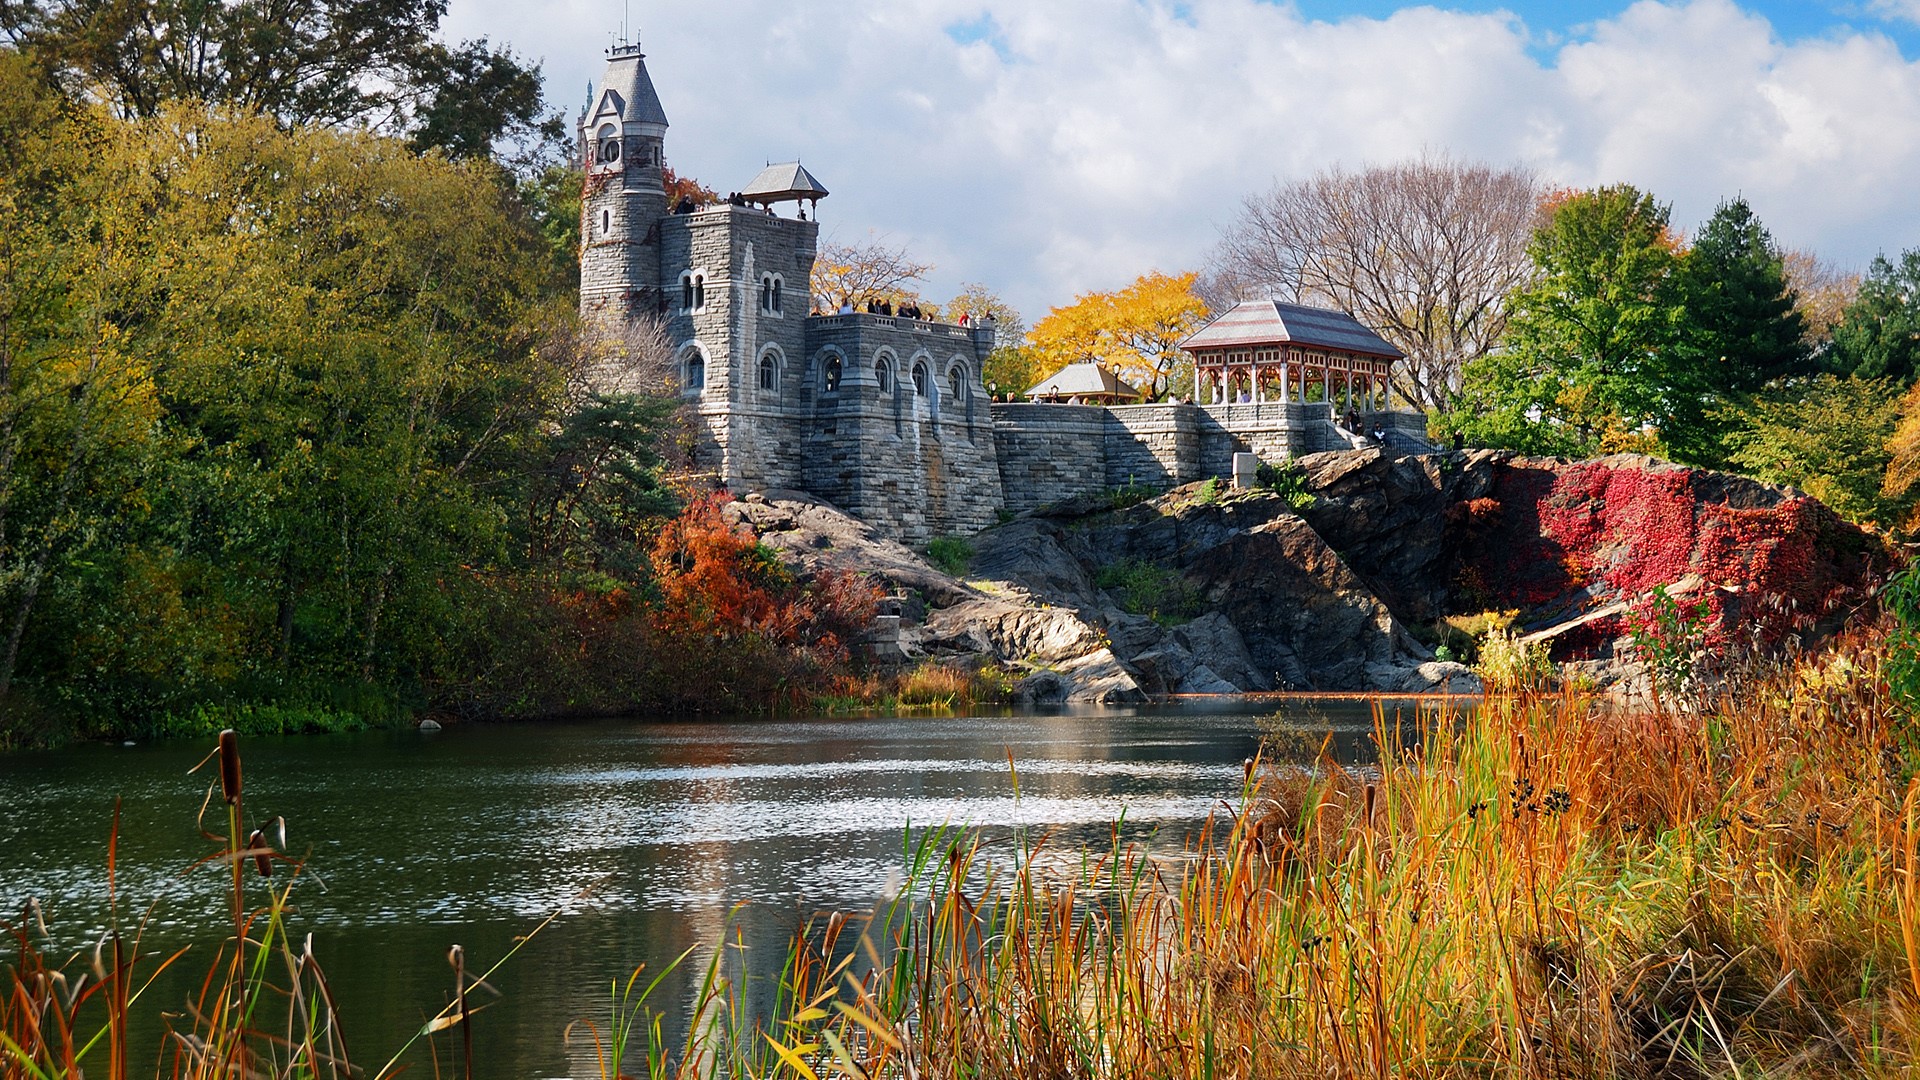 General 1920x1080 nature trees plants grass water clouds sky castle Belvedere Castle New York City USA Central Park